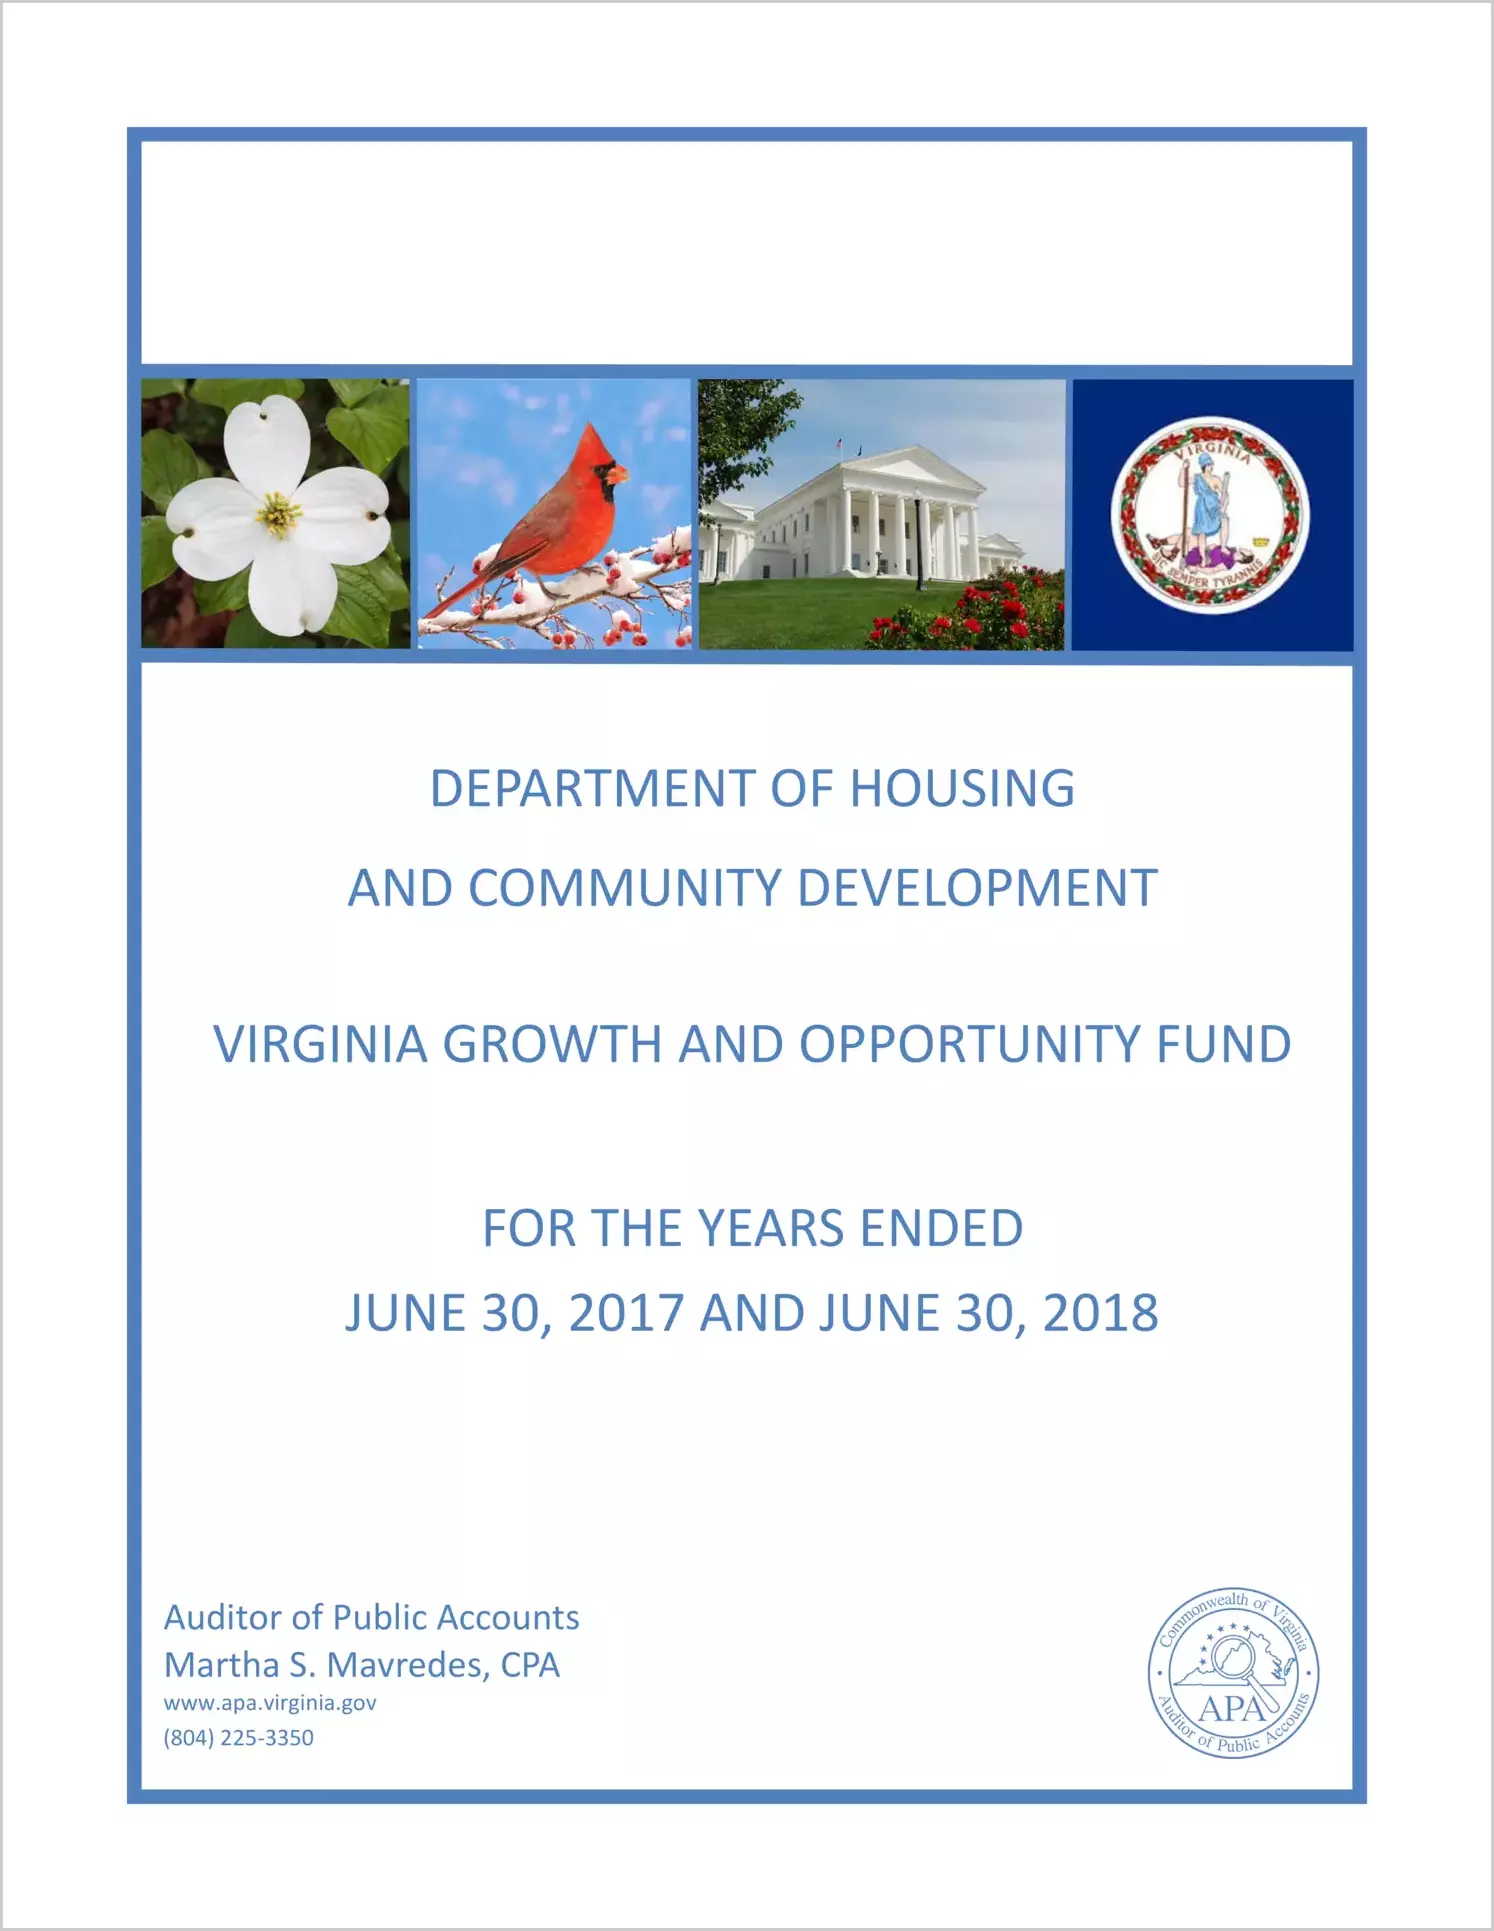 Department of Housing and Community Development Virginia Growth and Opportunity Fund for the years ended June 30, 2017 and June 30, 2018